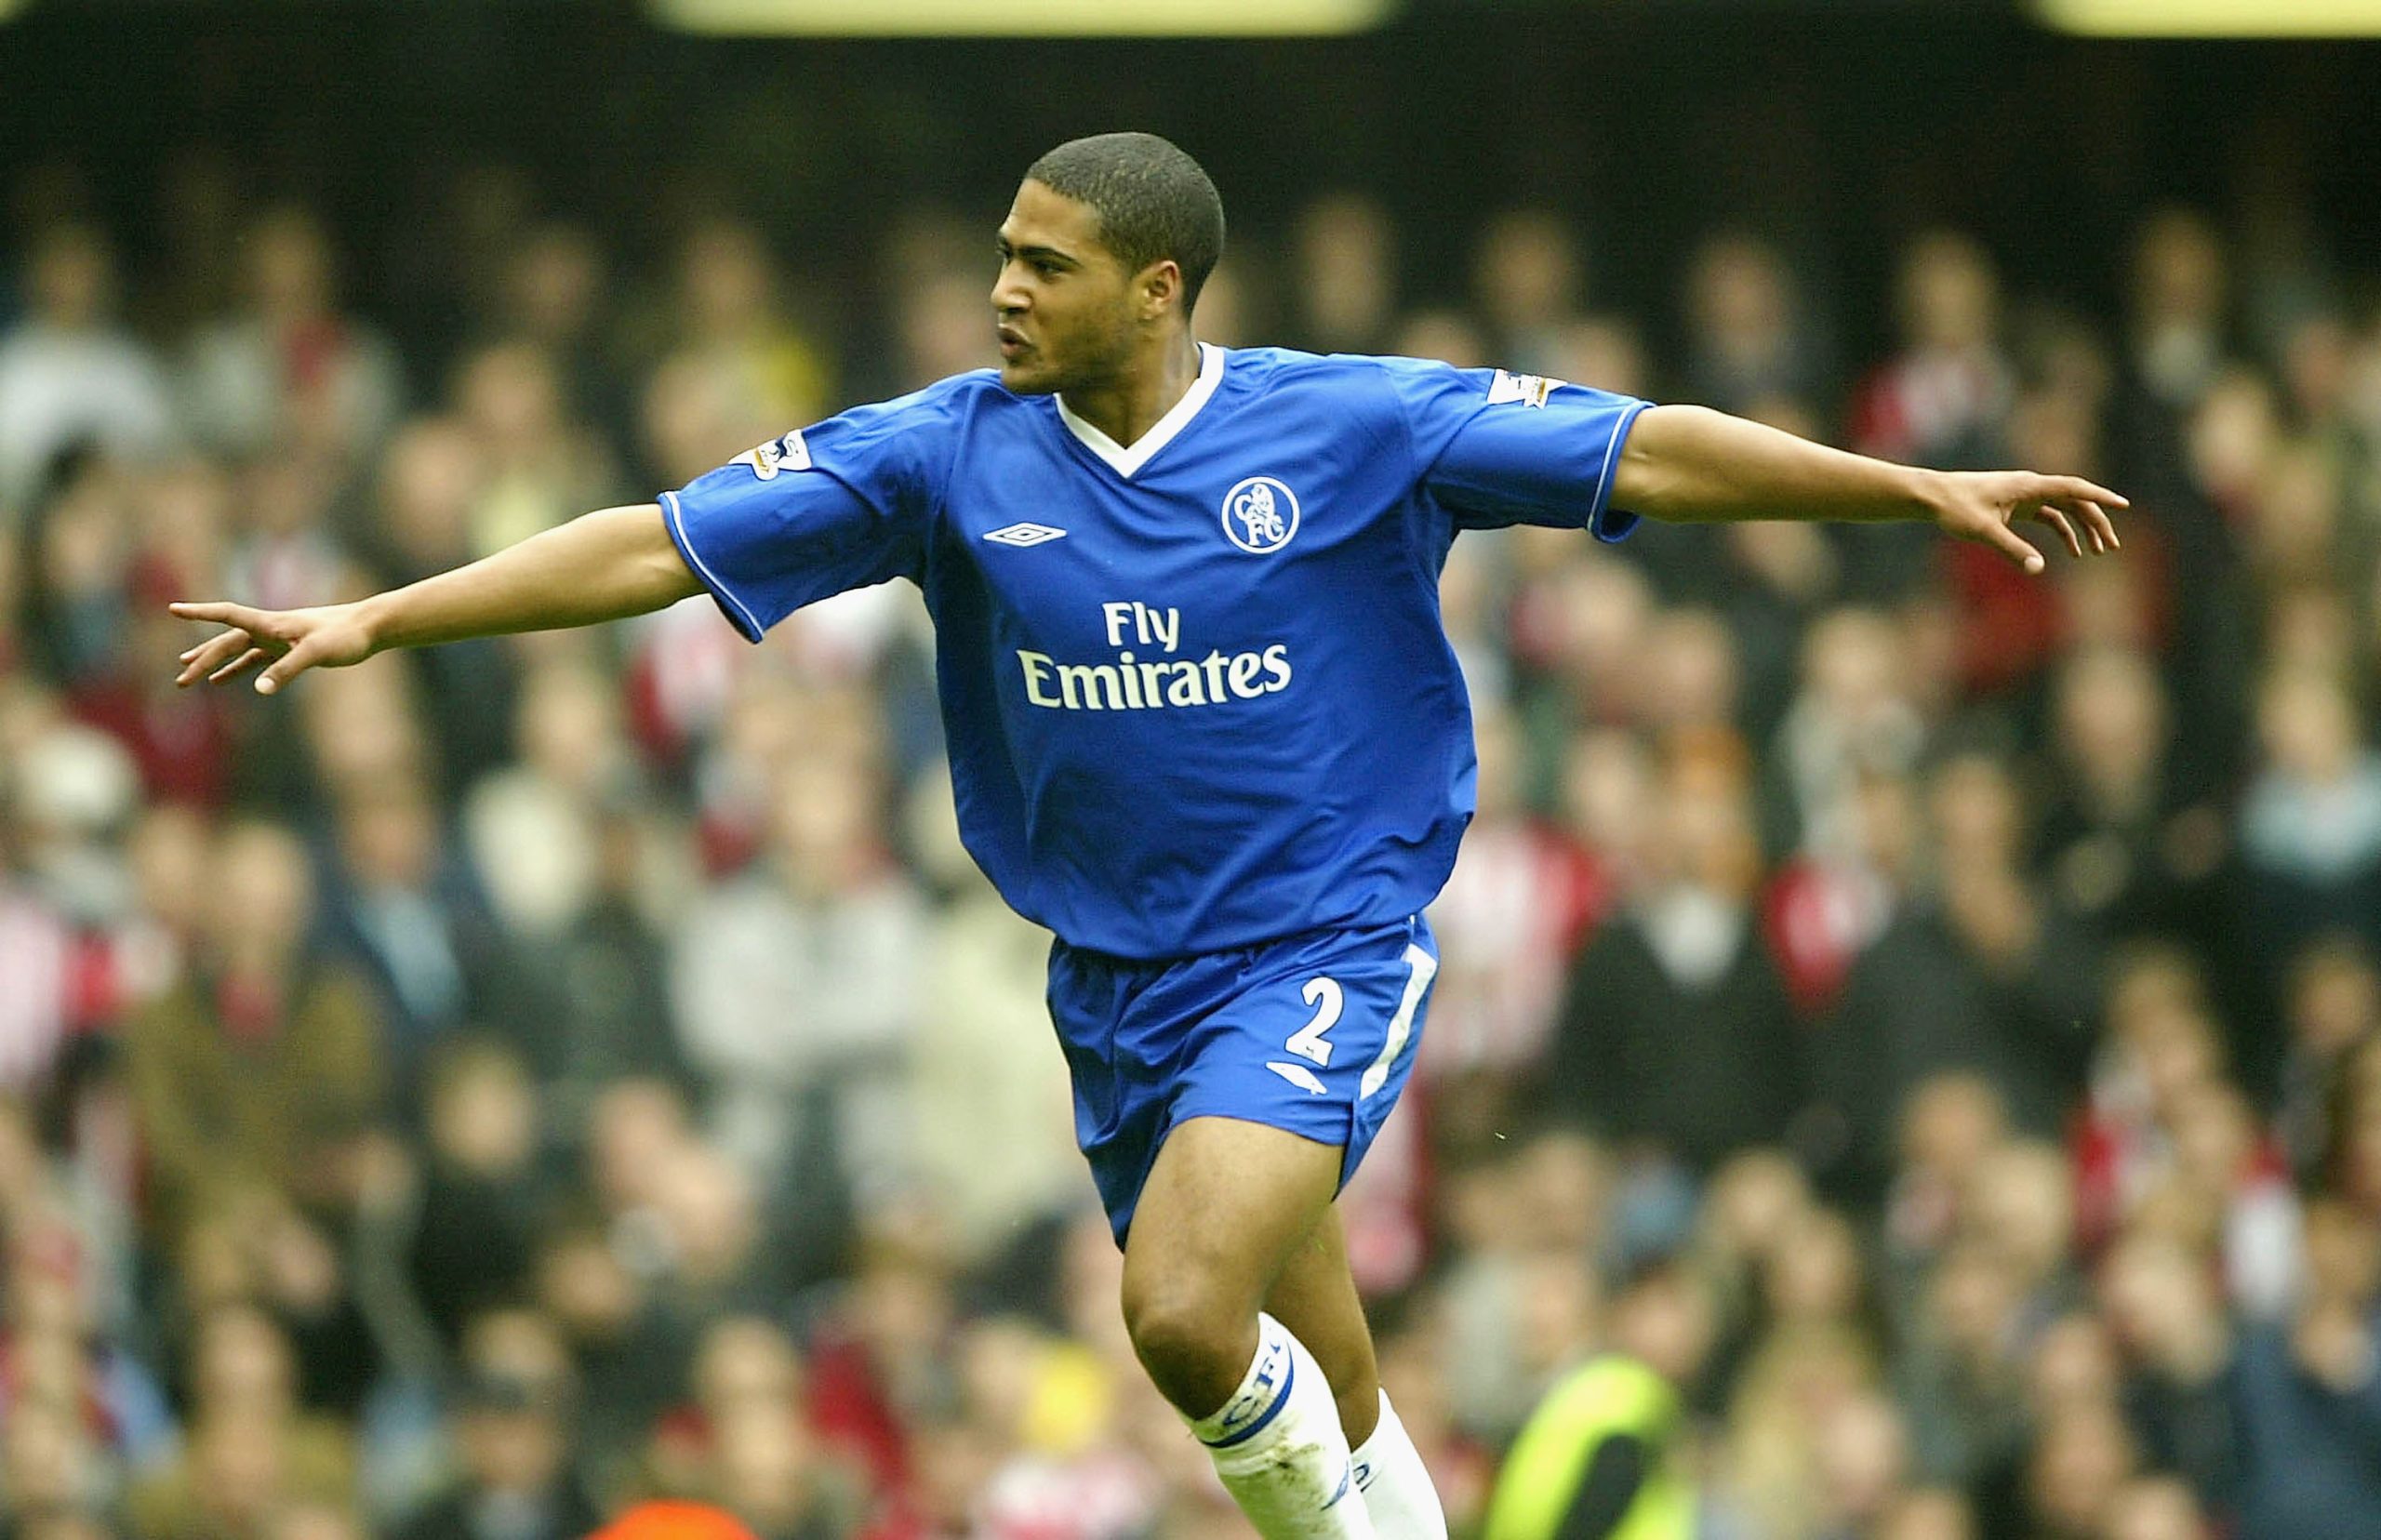 Glen Johnson during his playing days at Chelsea.